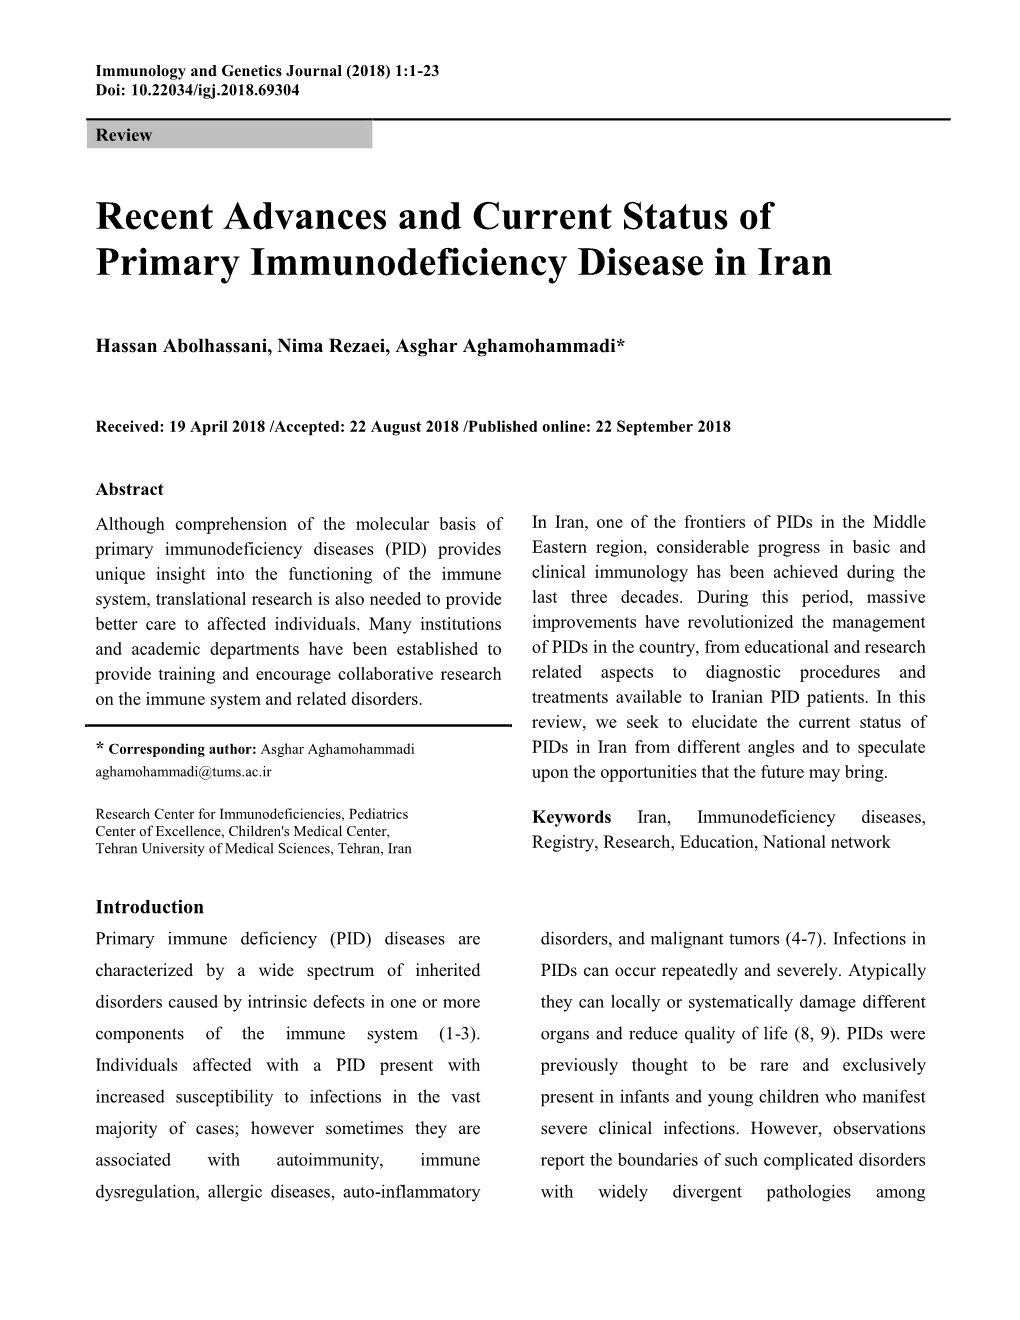 Recent Advances and Current Status of Primary Immunodeficiency Disease in Iran